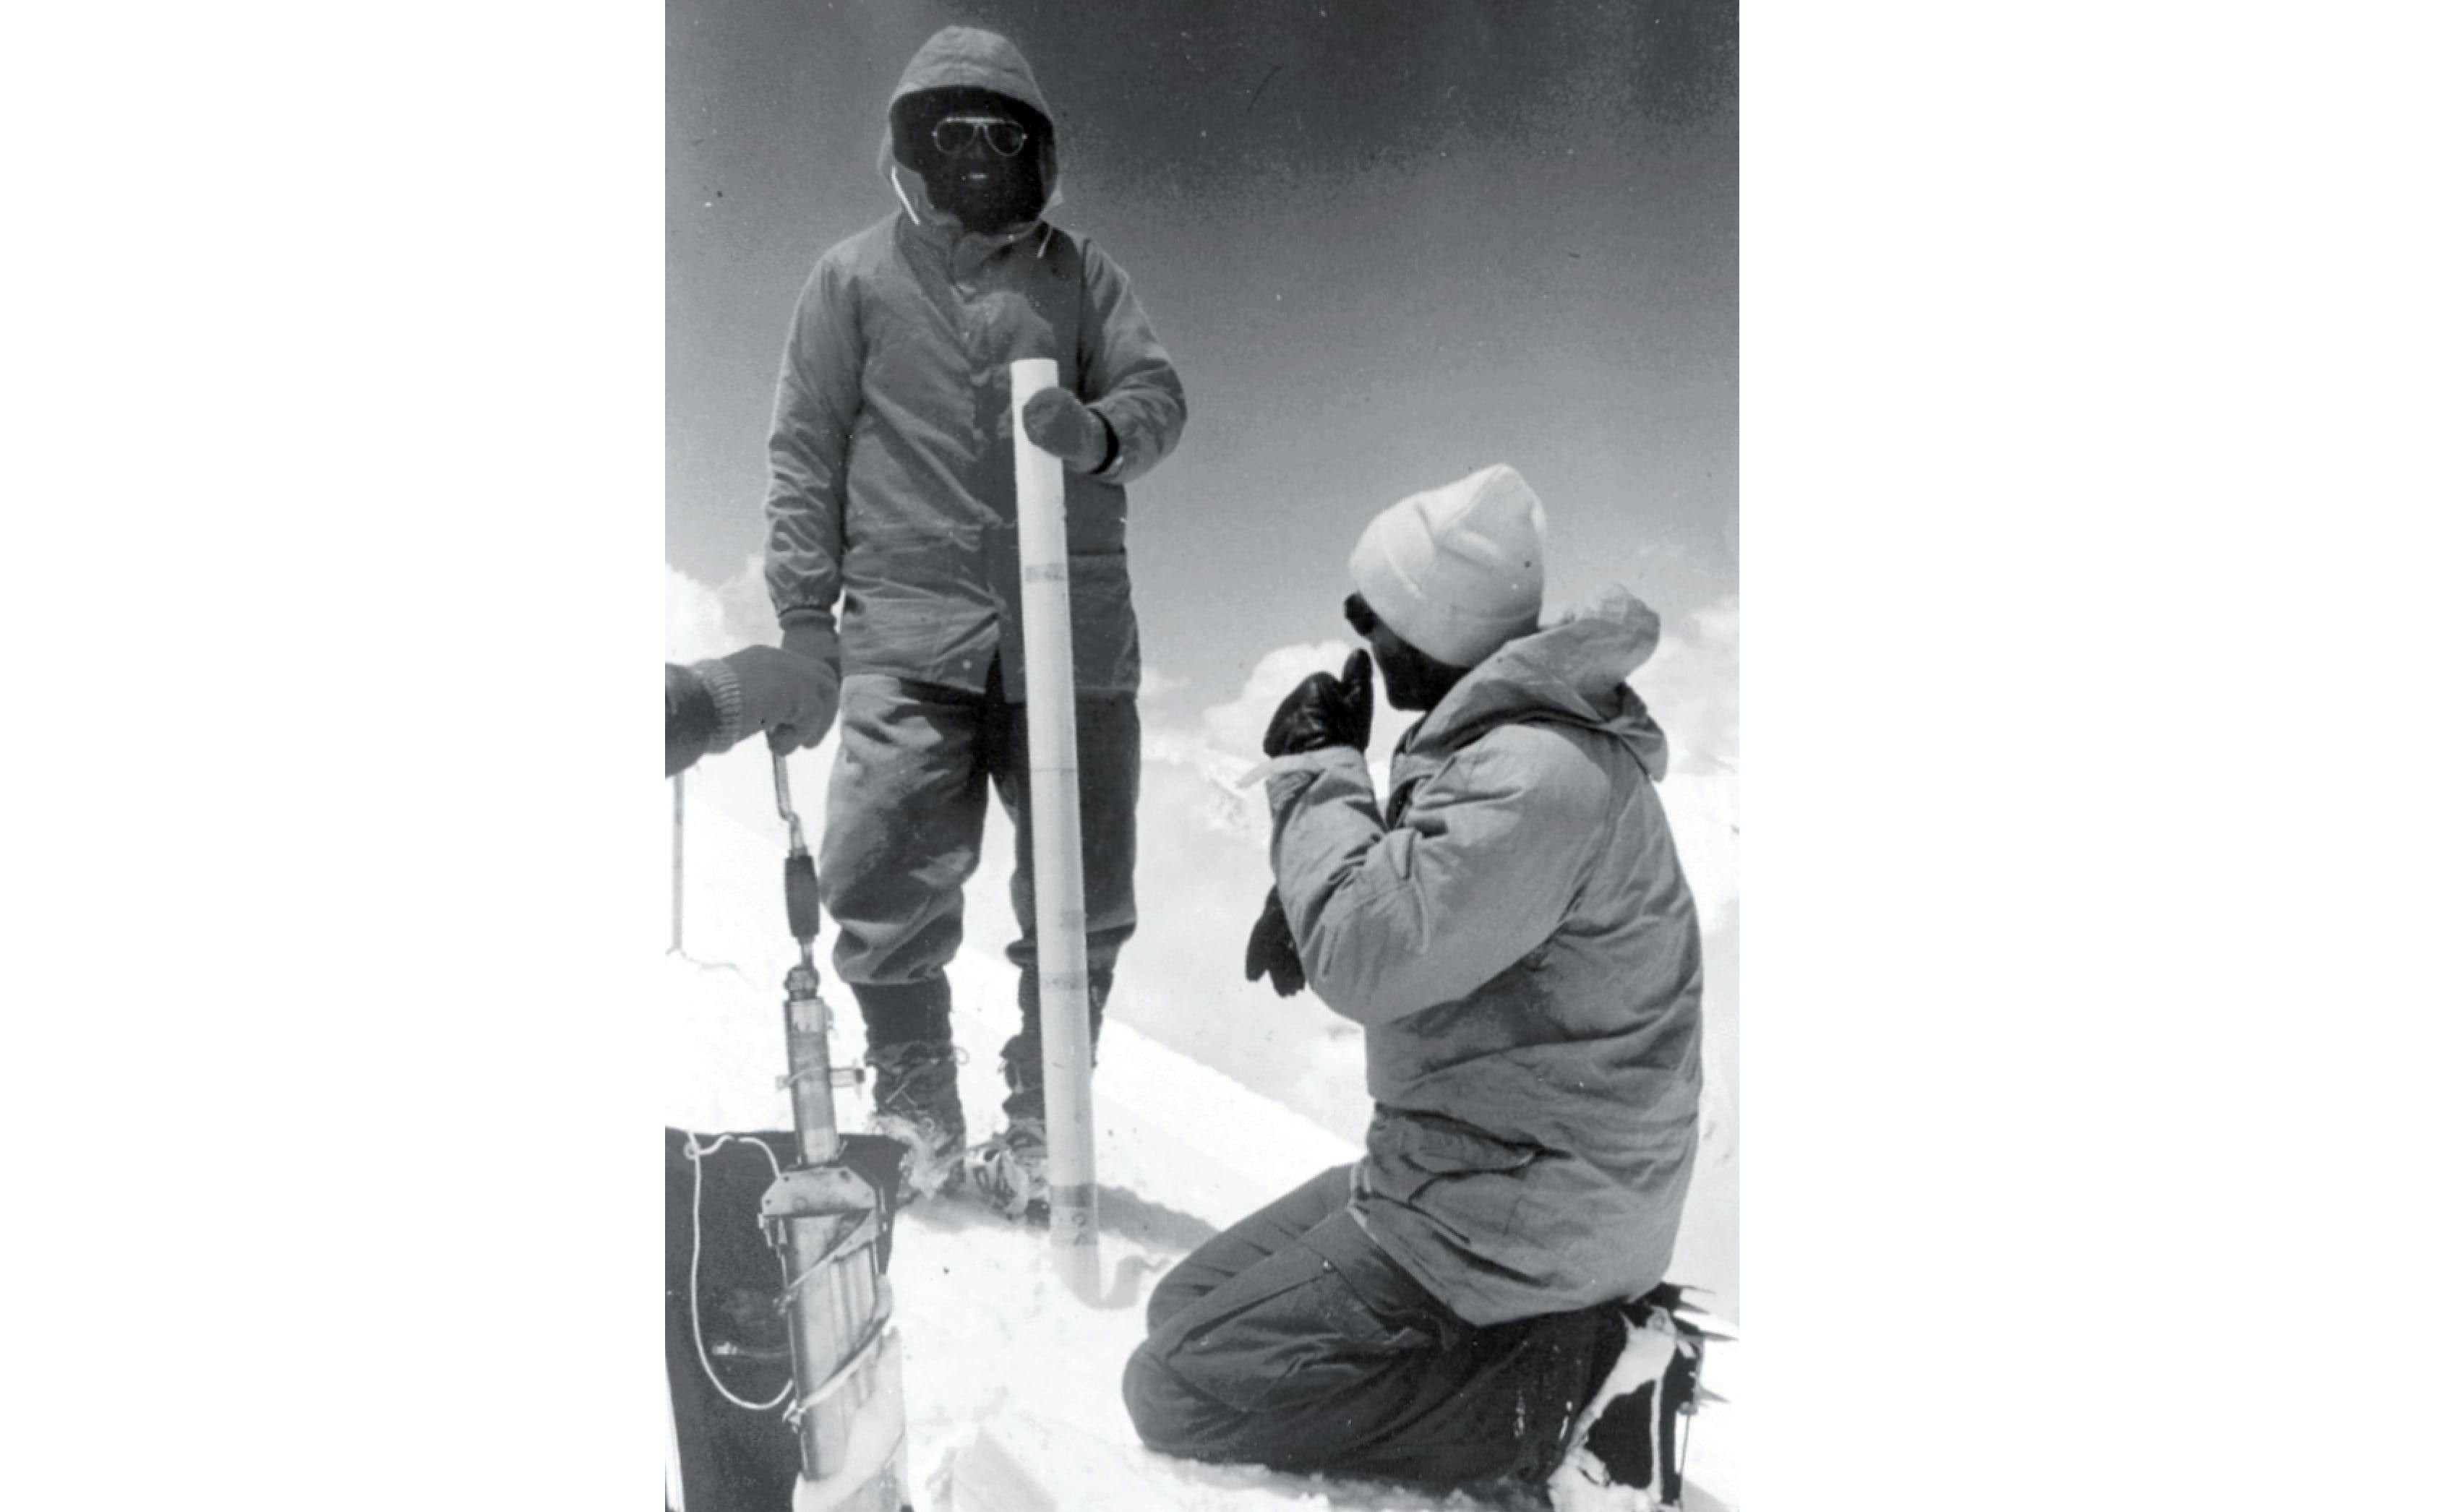 Capt MS Kohli planting the antenna of the SNAP Device along with a fellow American expedition member on Nanda Kot, 1967